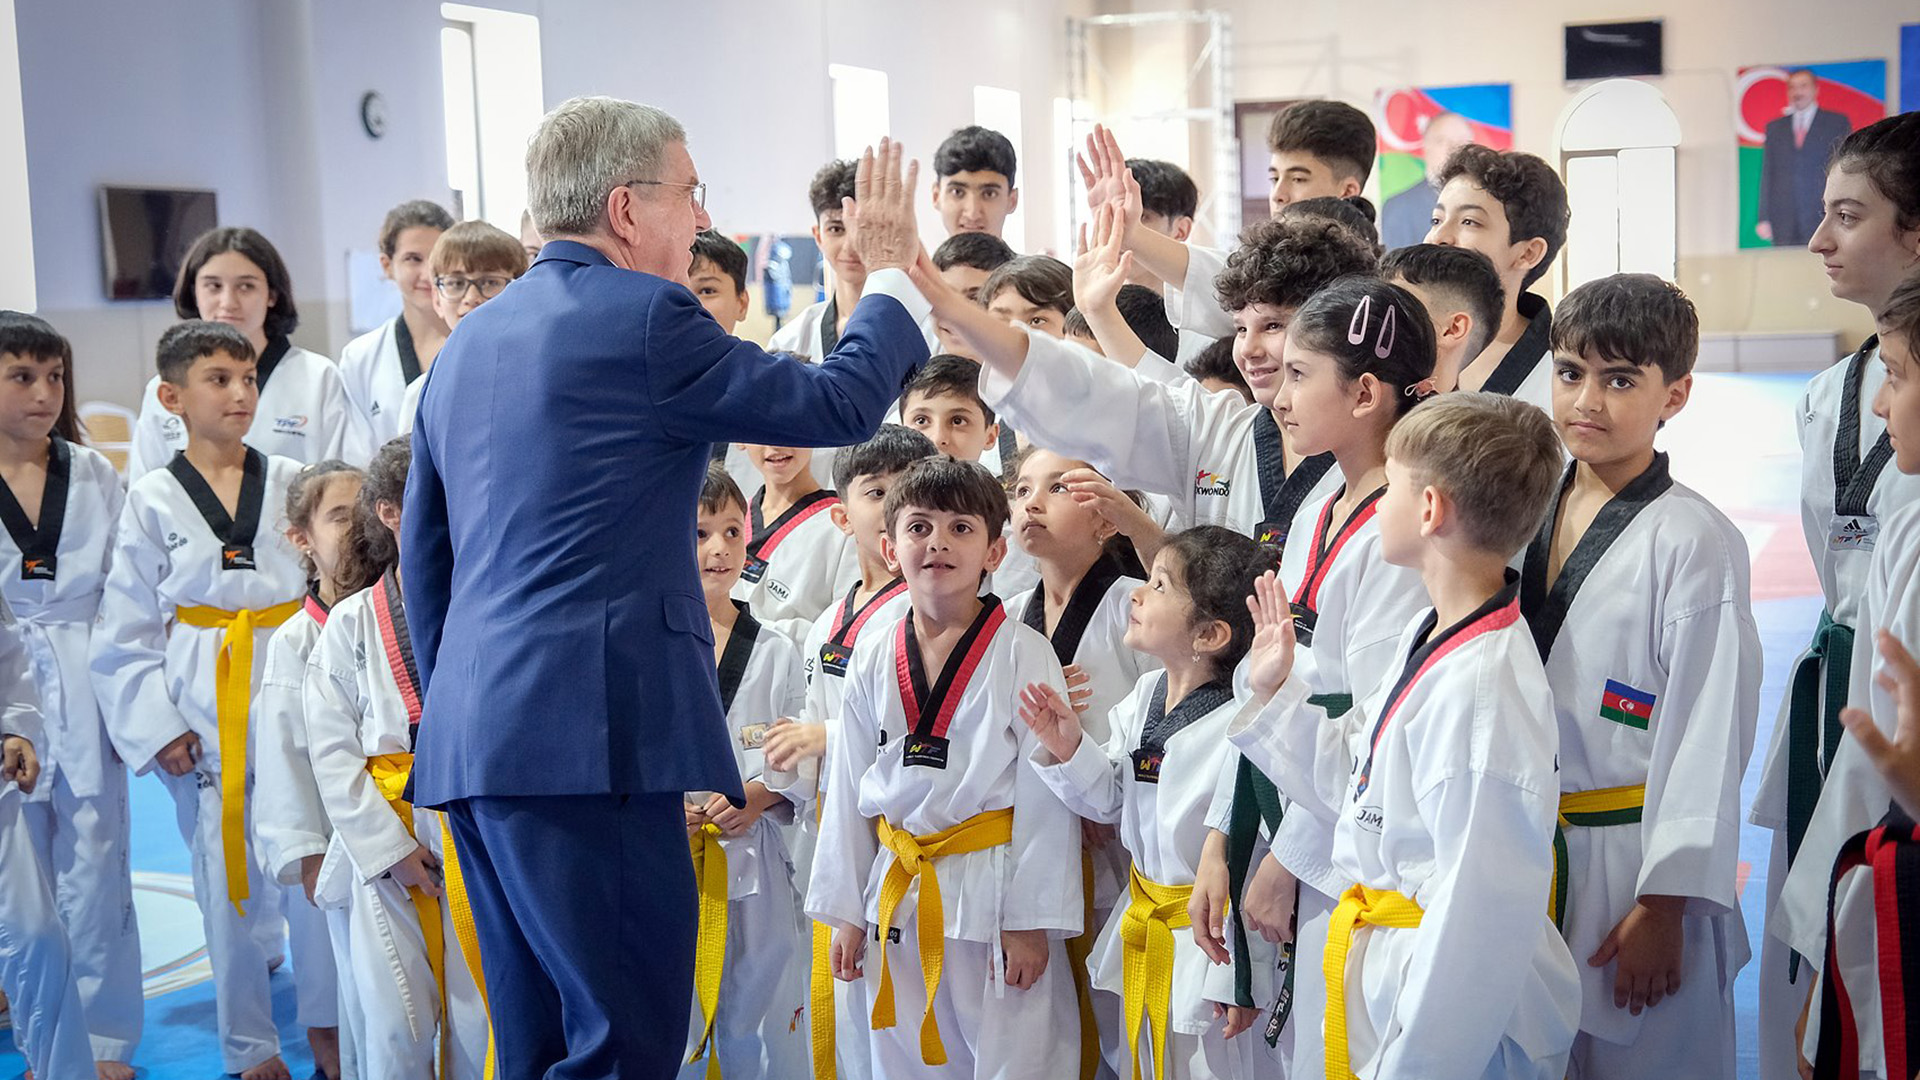 Before Bach’s eyes, World Taekwondo celebrated its 50th anniversary with the World Championship